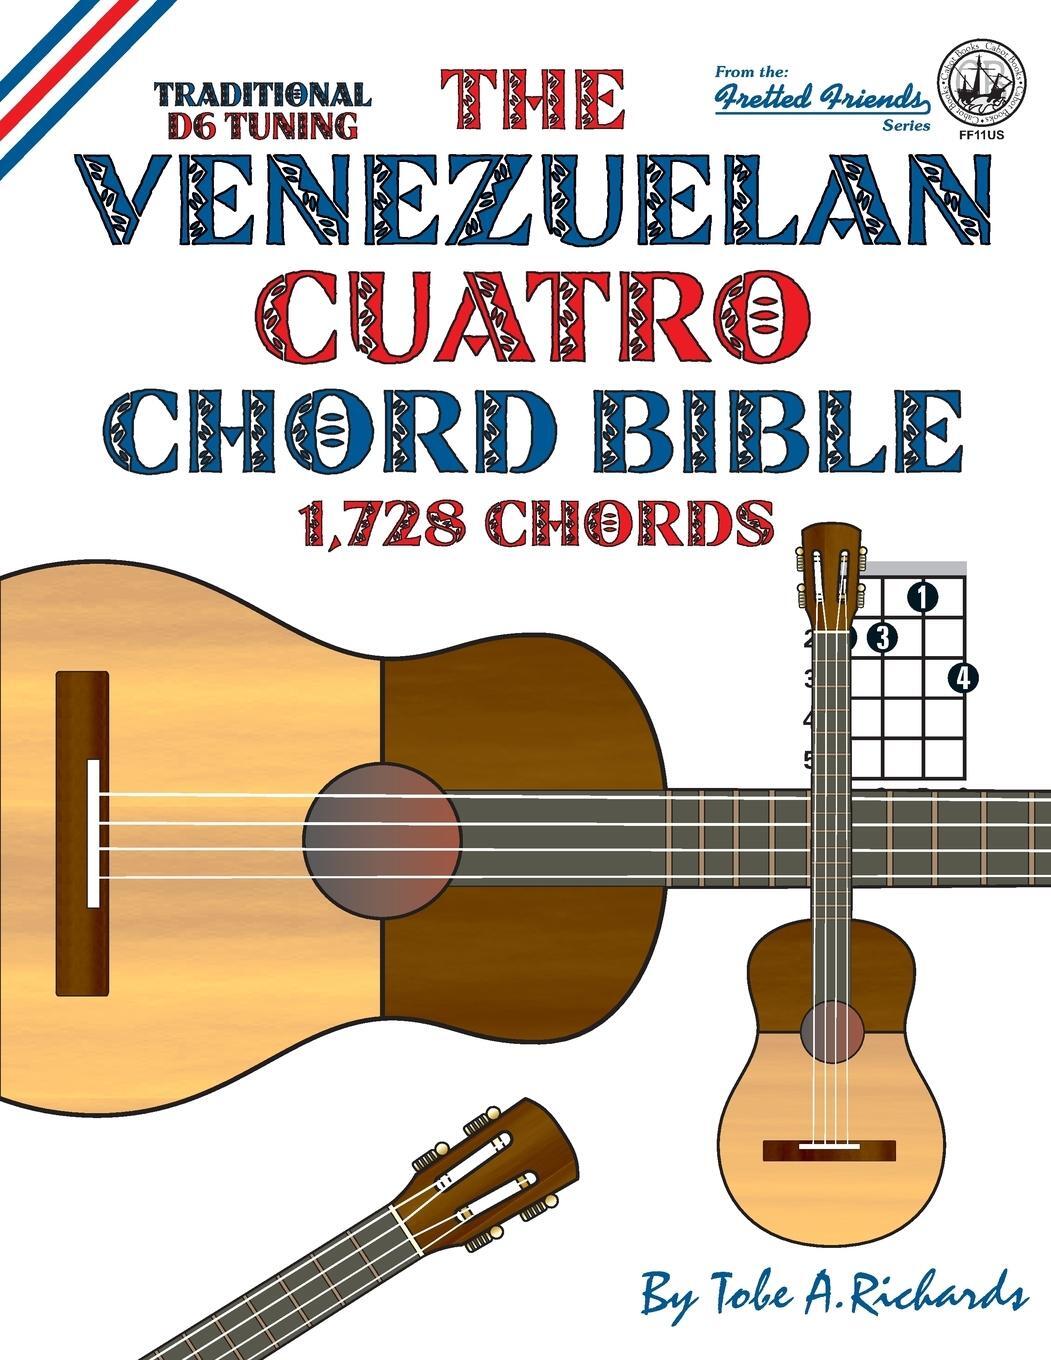 Cover: 9781906207328 | The Venezuelan Cuatro Chord Bible | Traditional D6 Tuning 1,728 Chords